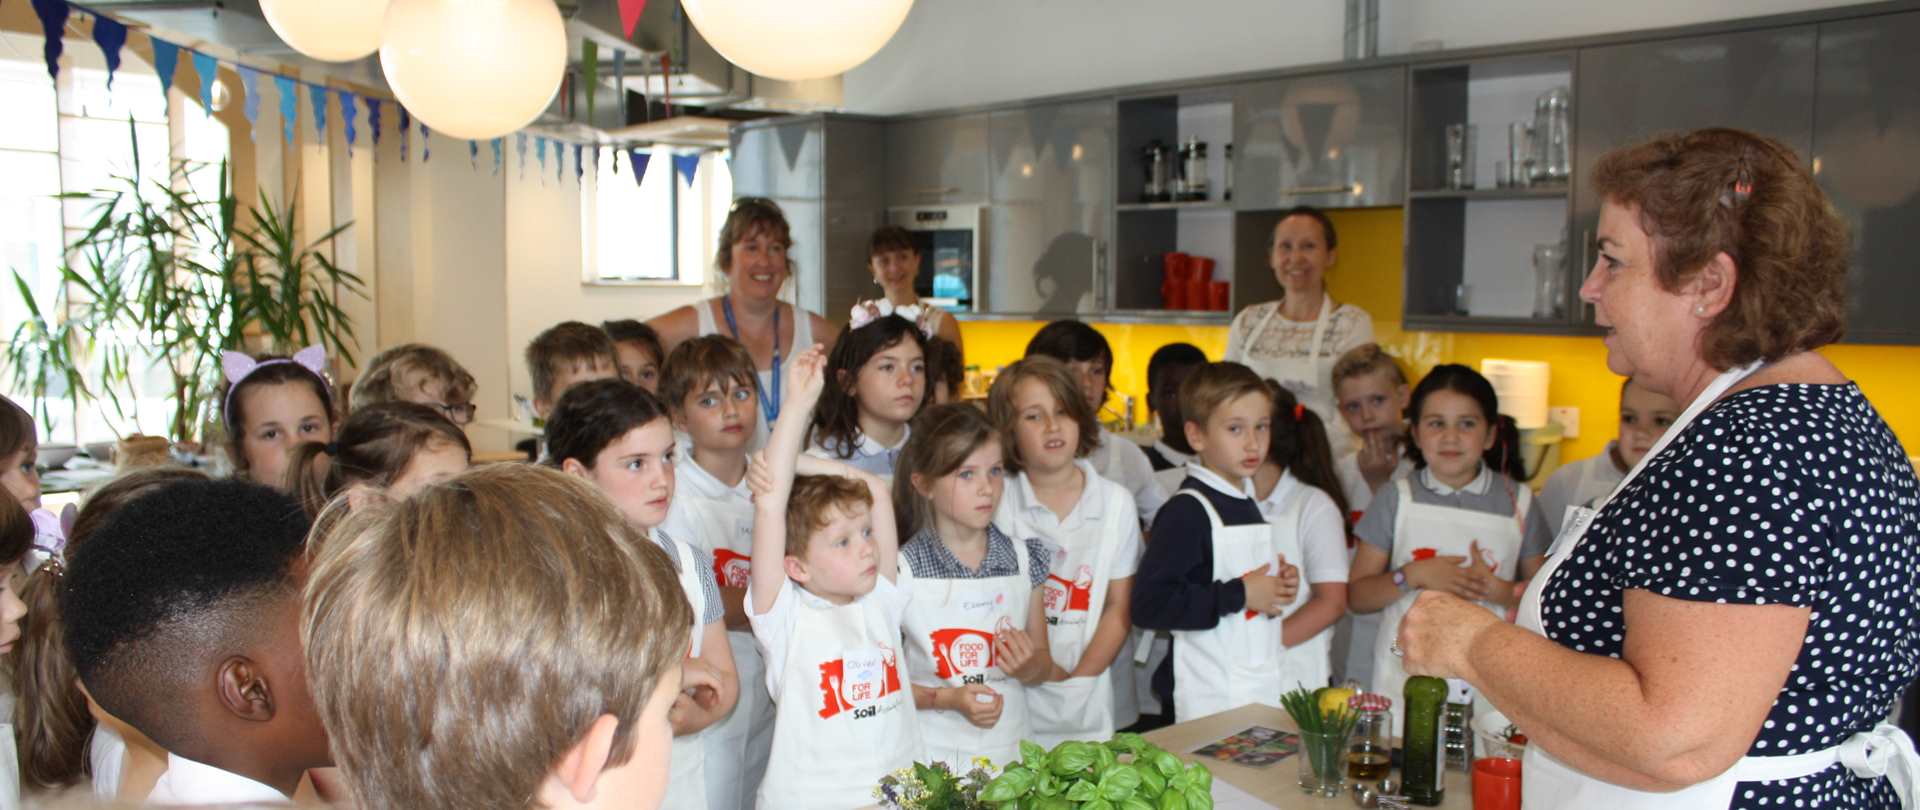 a group of children learning cooking skills